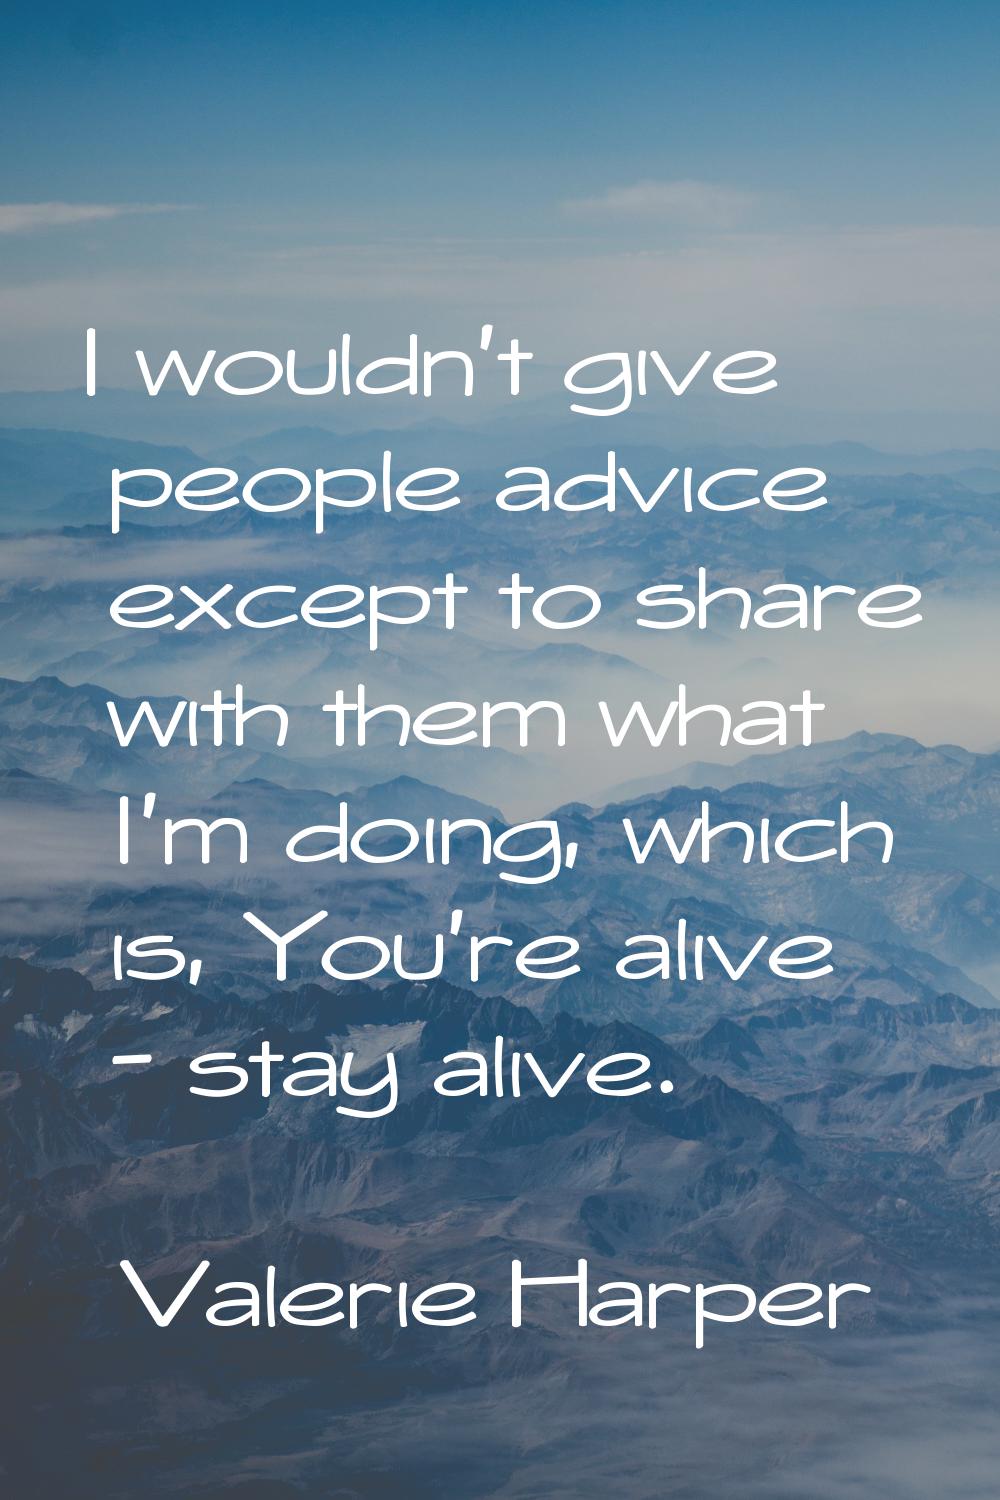 I wouldn't give people advice except to share with them what I'm doing, which is, You're alive - st